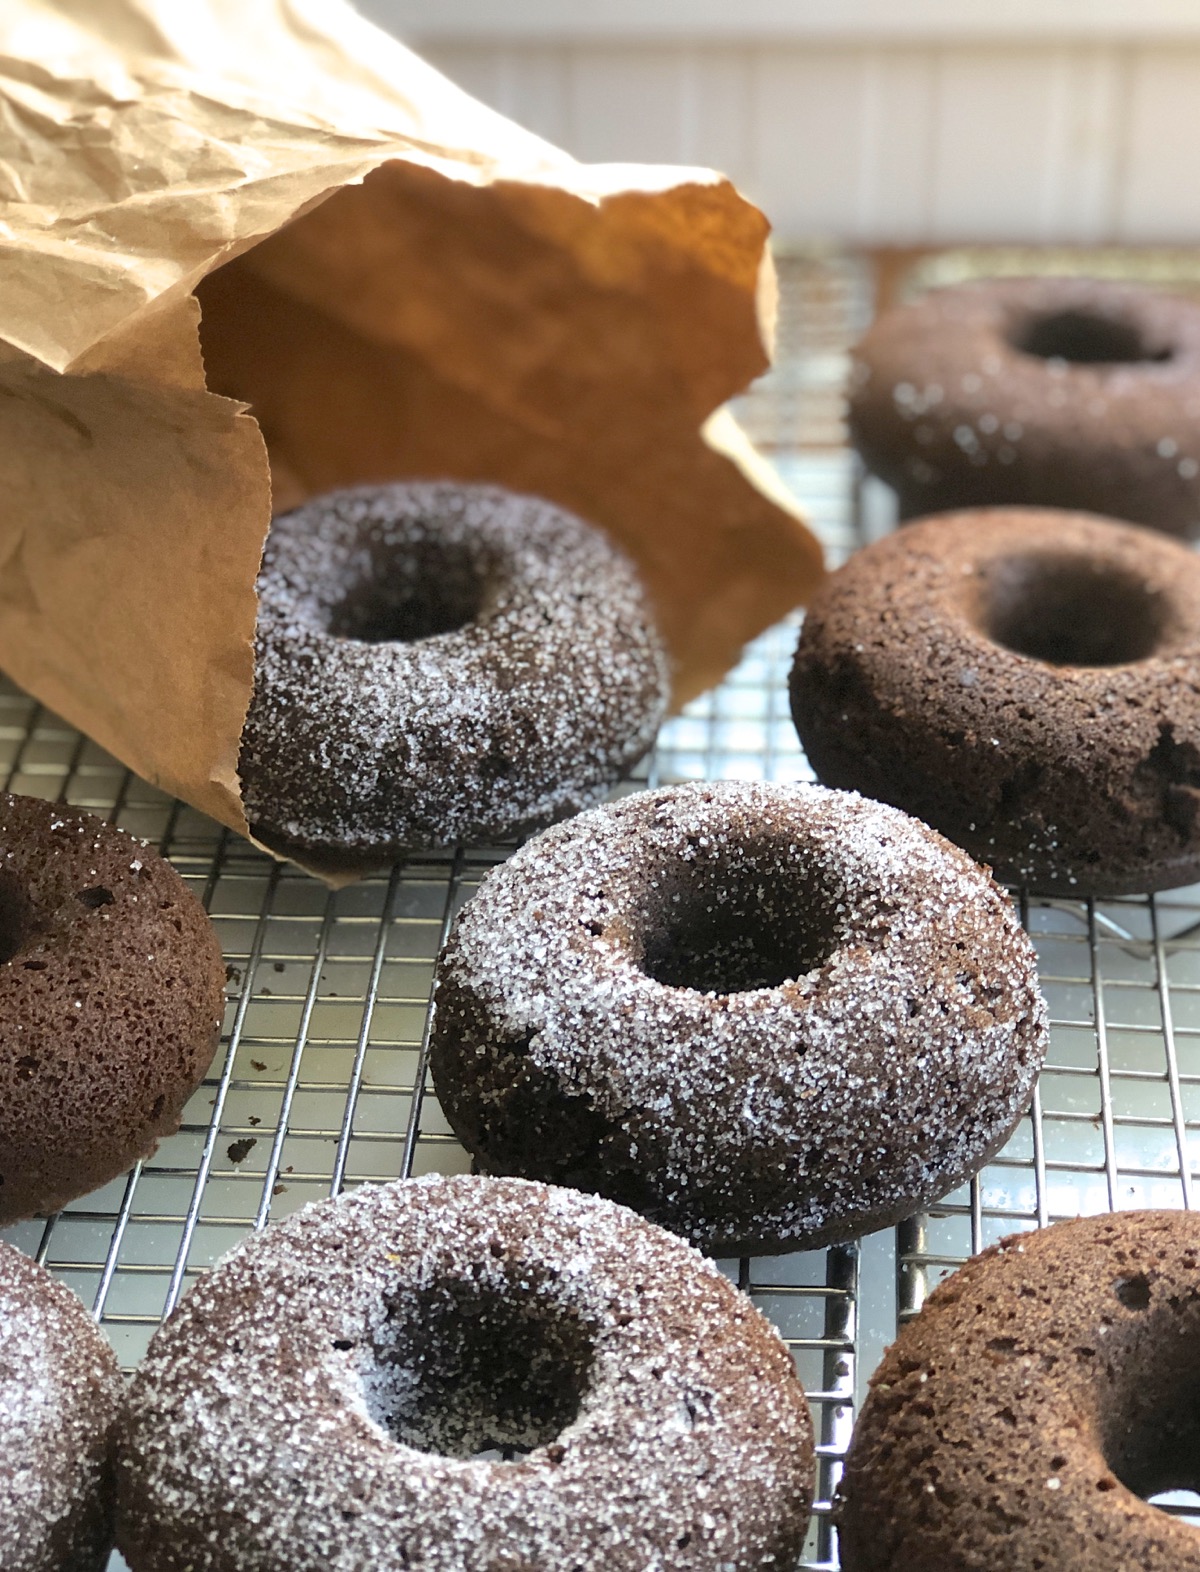 Chocolate doughnuts on a rack, one in paper bag with granulated sugar for shaking.